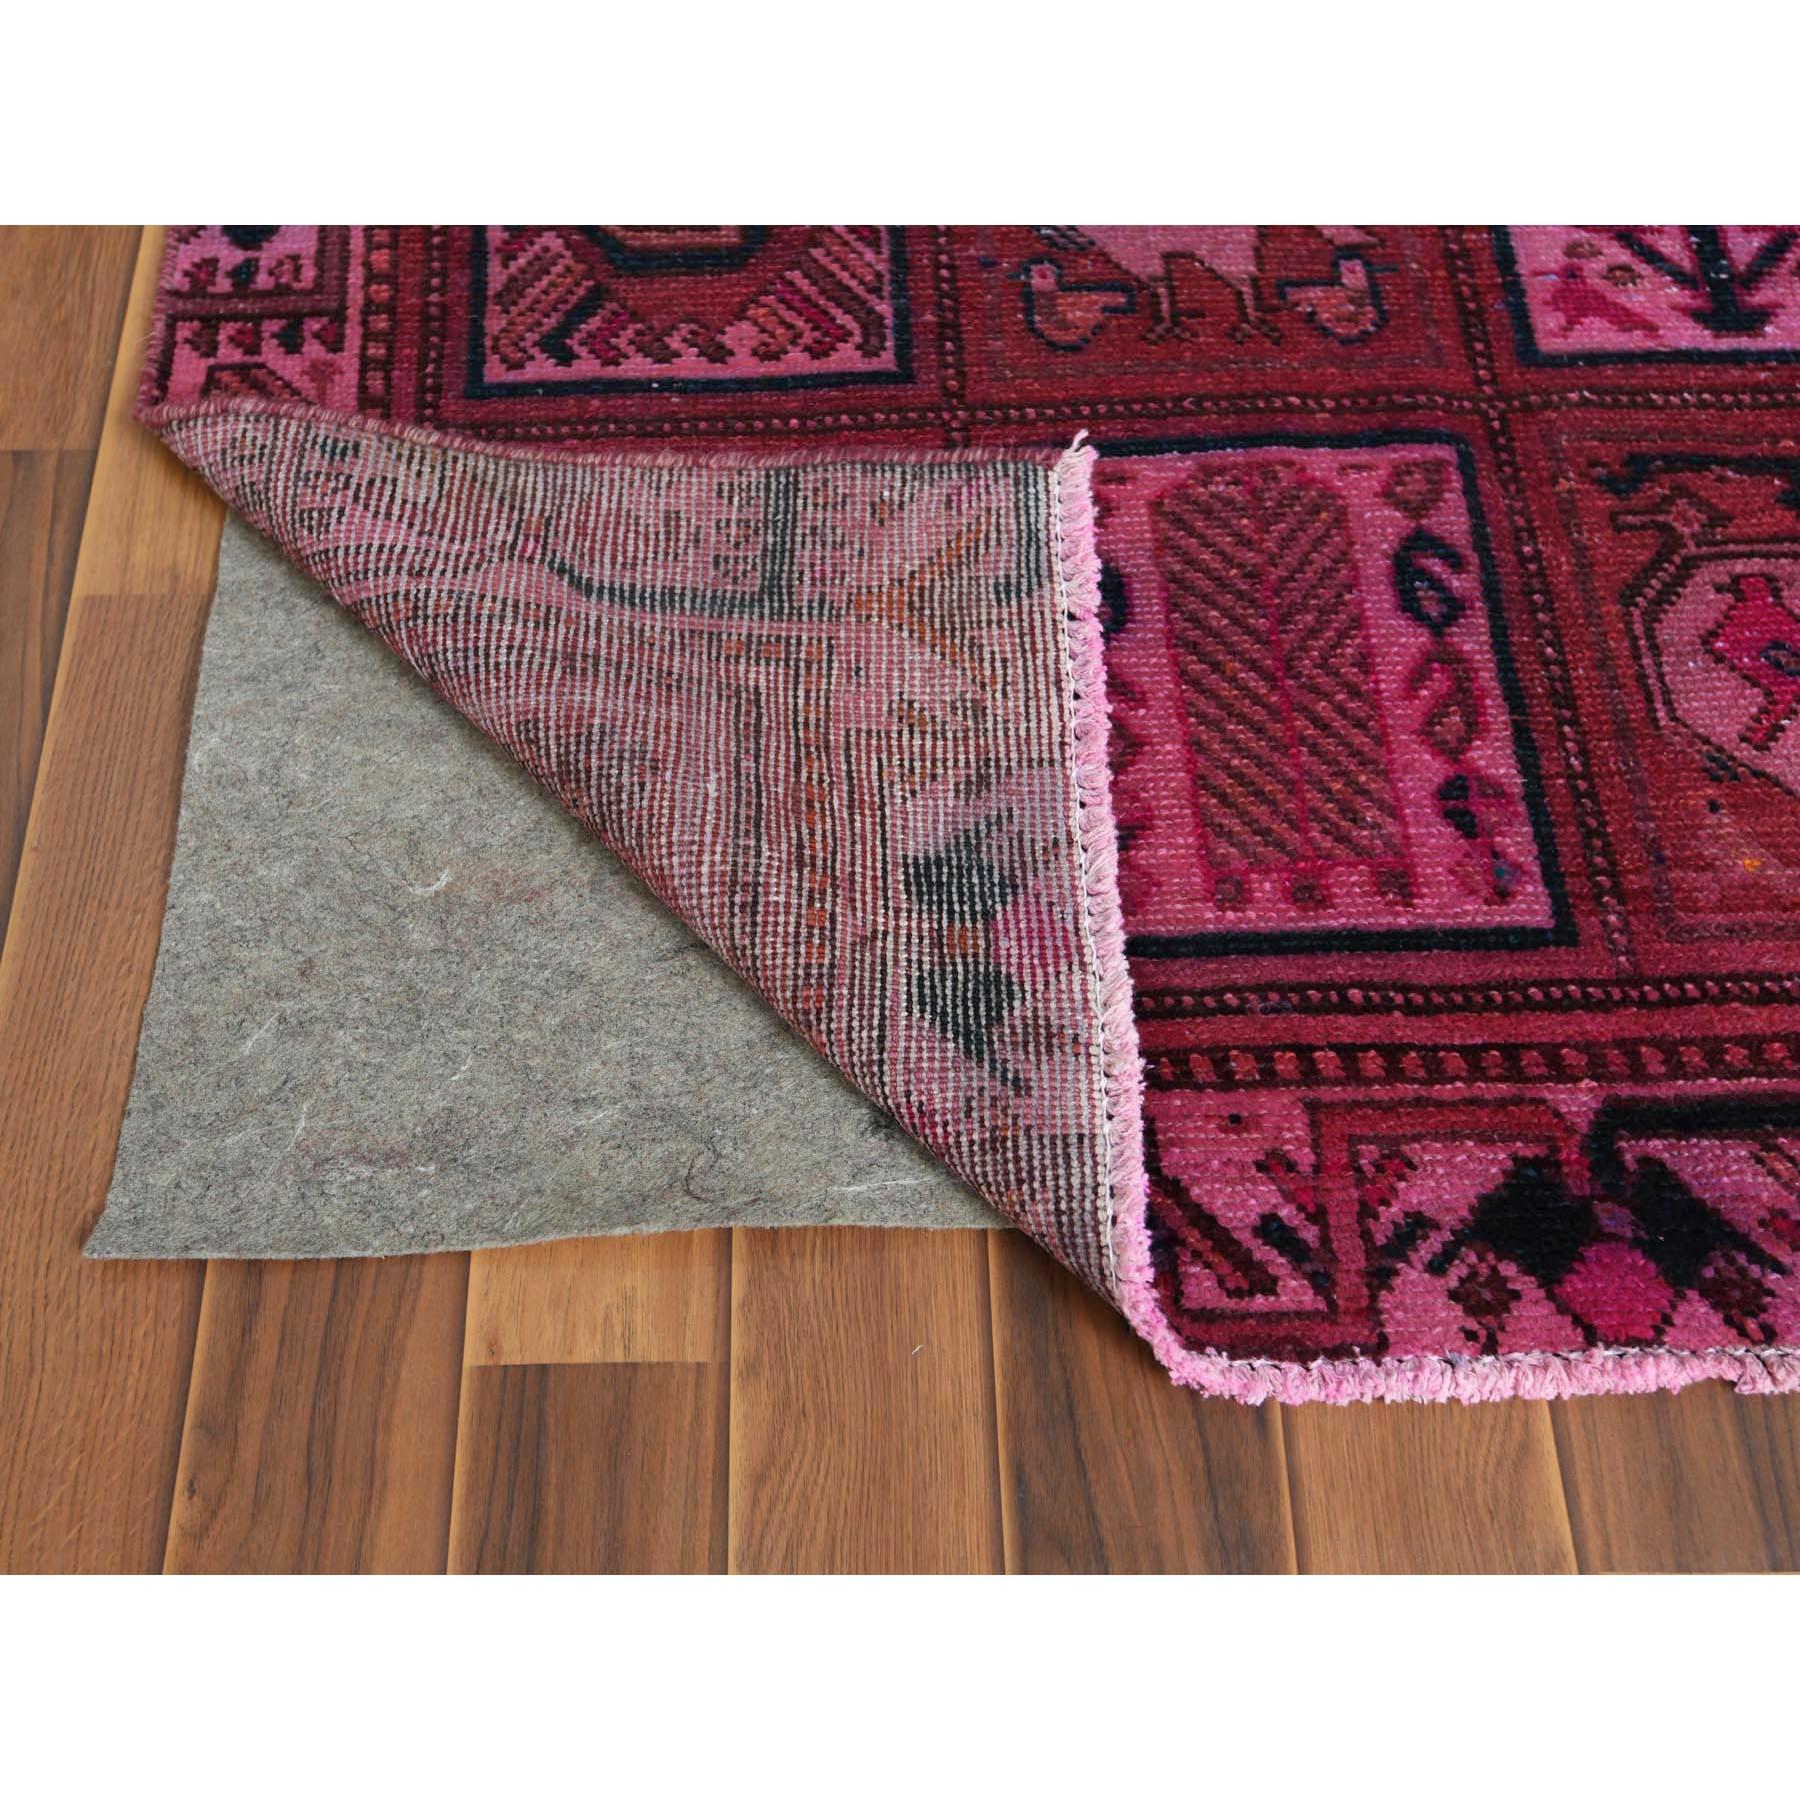 Medieval Semi Antique Persian Bakhtiari with Golden Panel Design Sheared Low Handmade Rug For Sale